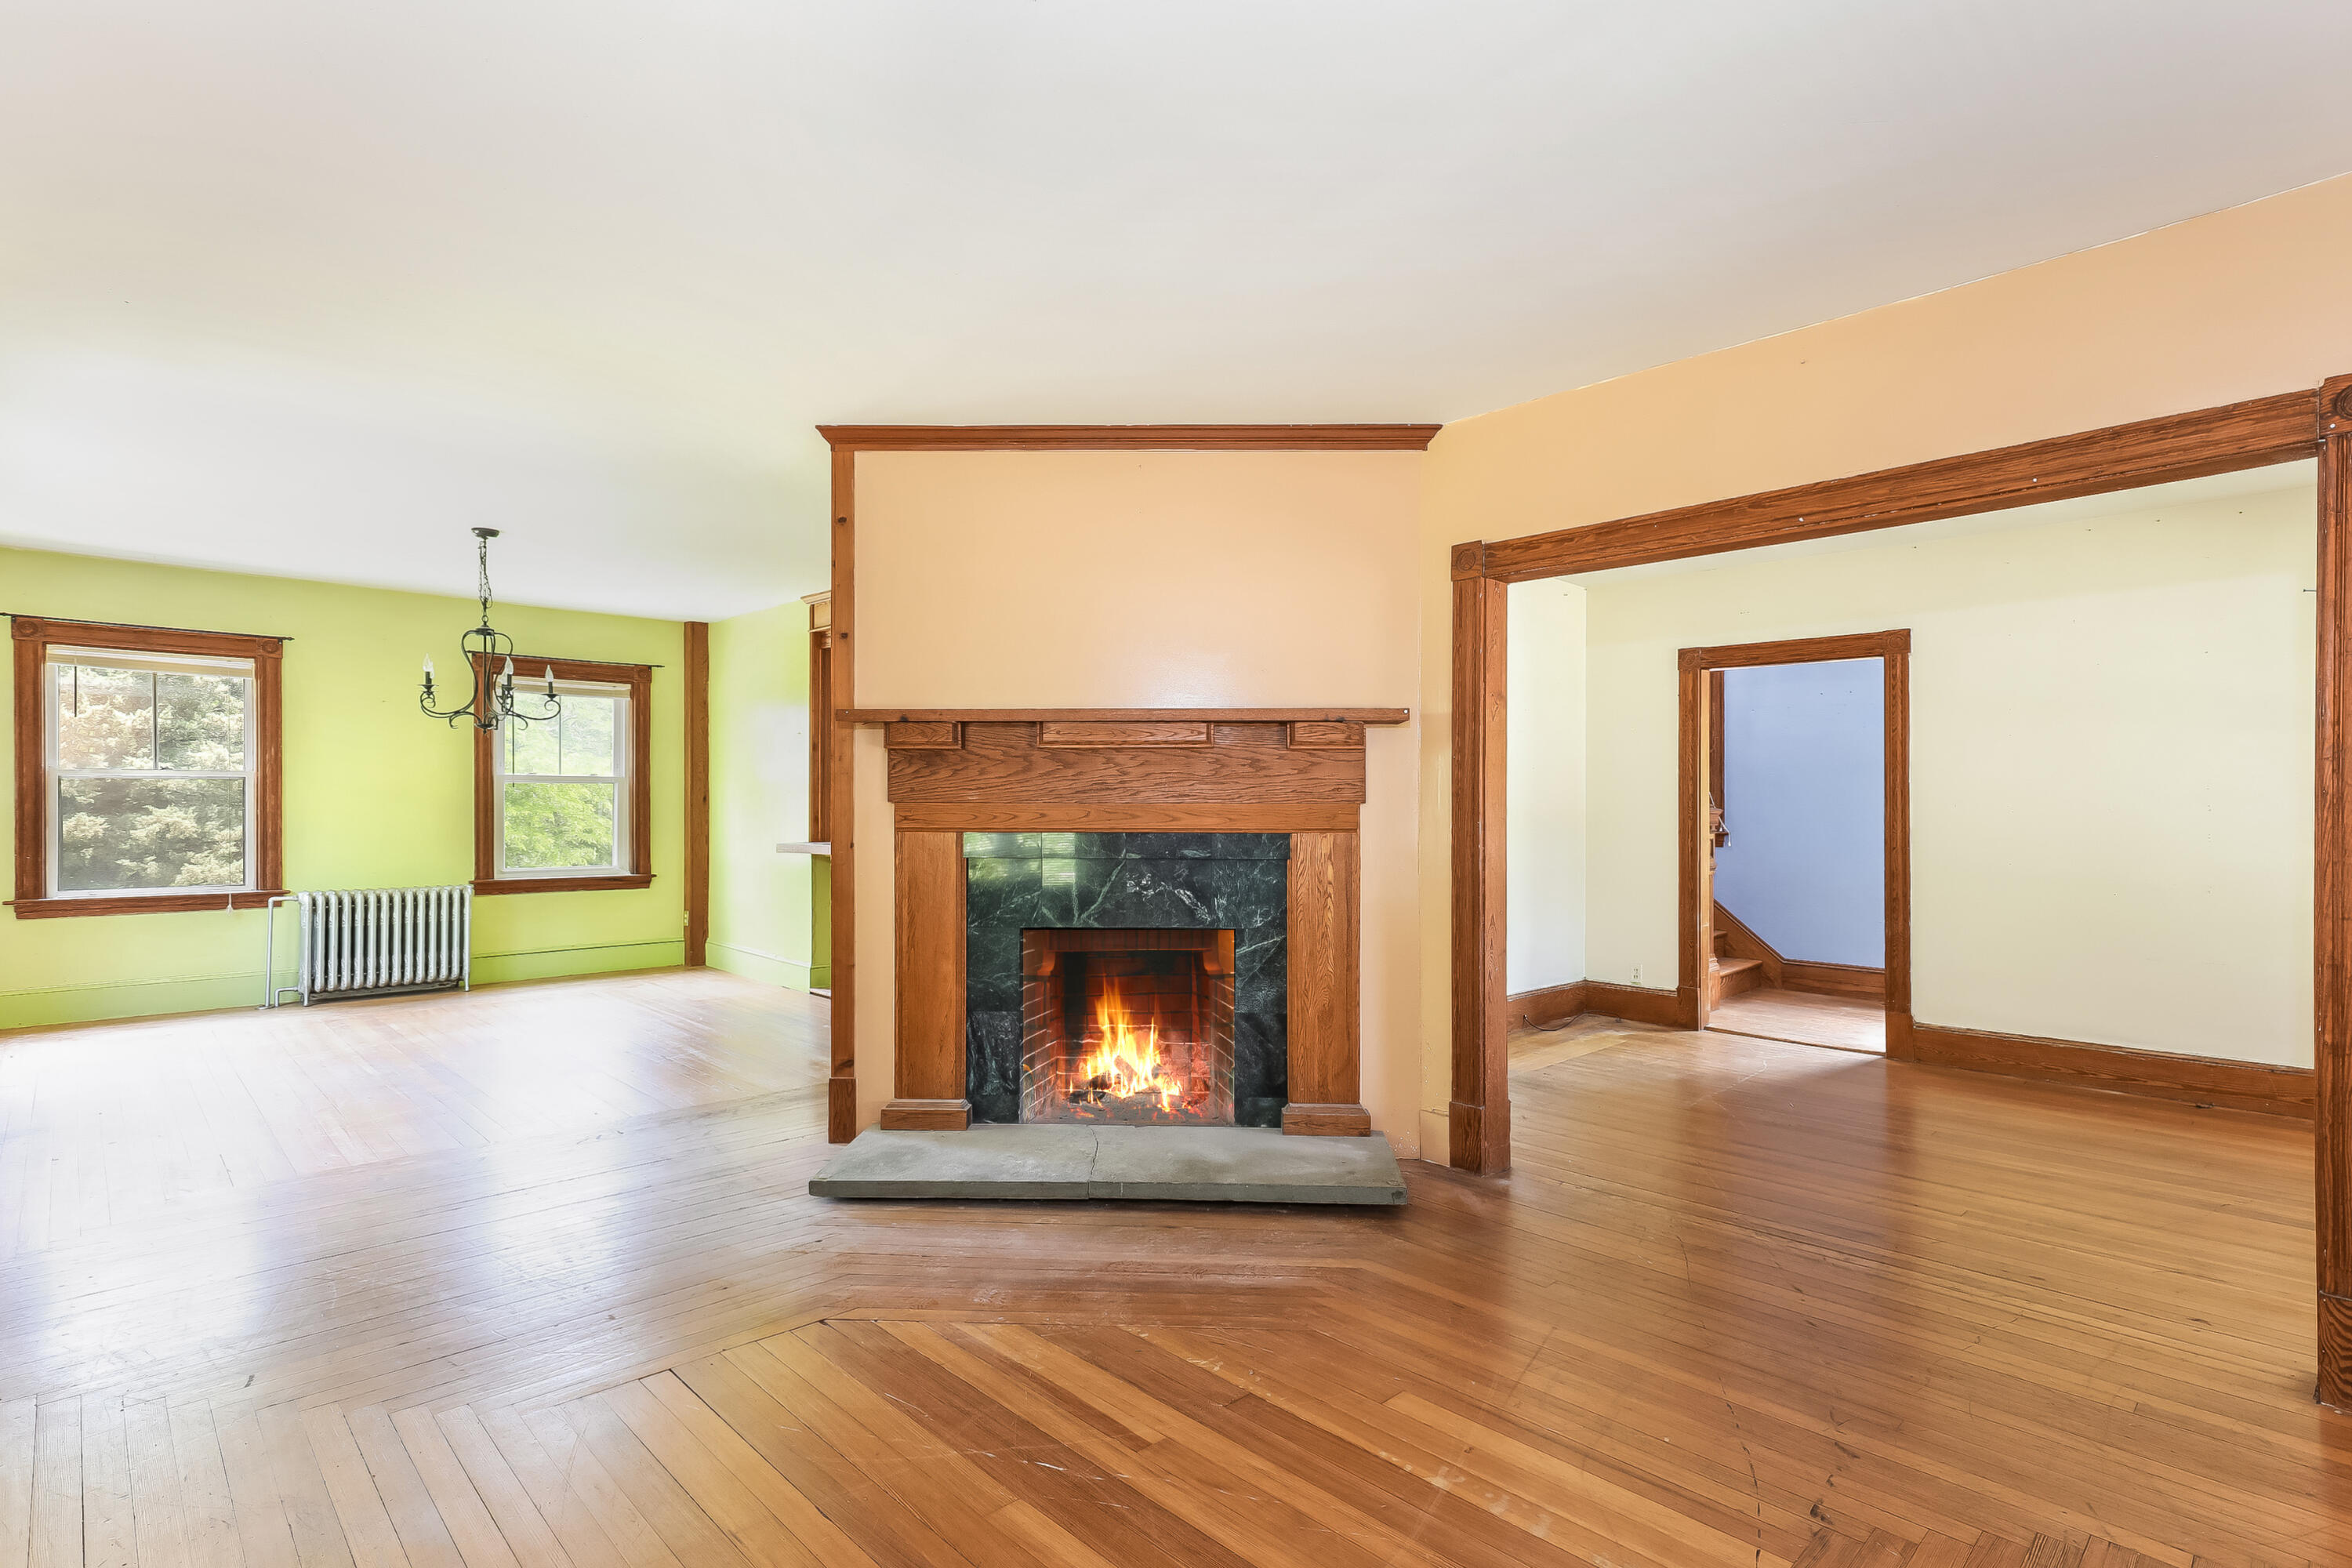 a view of an empty room with wooden floor fireplace and a window